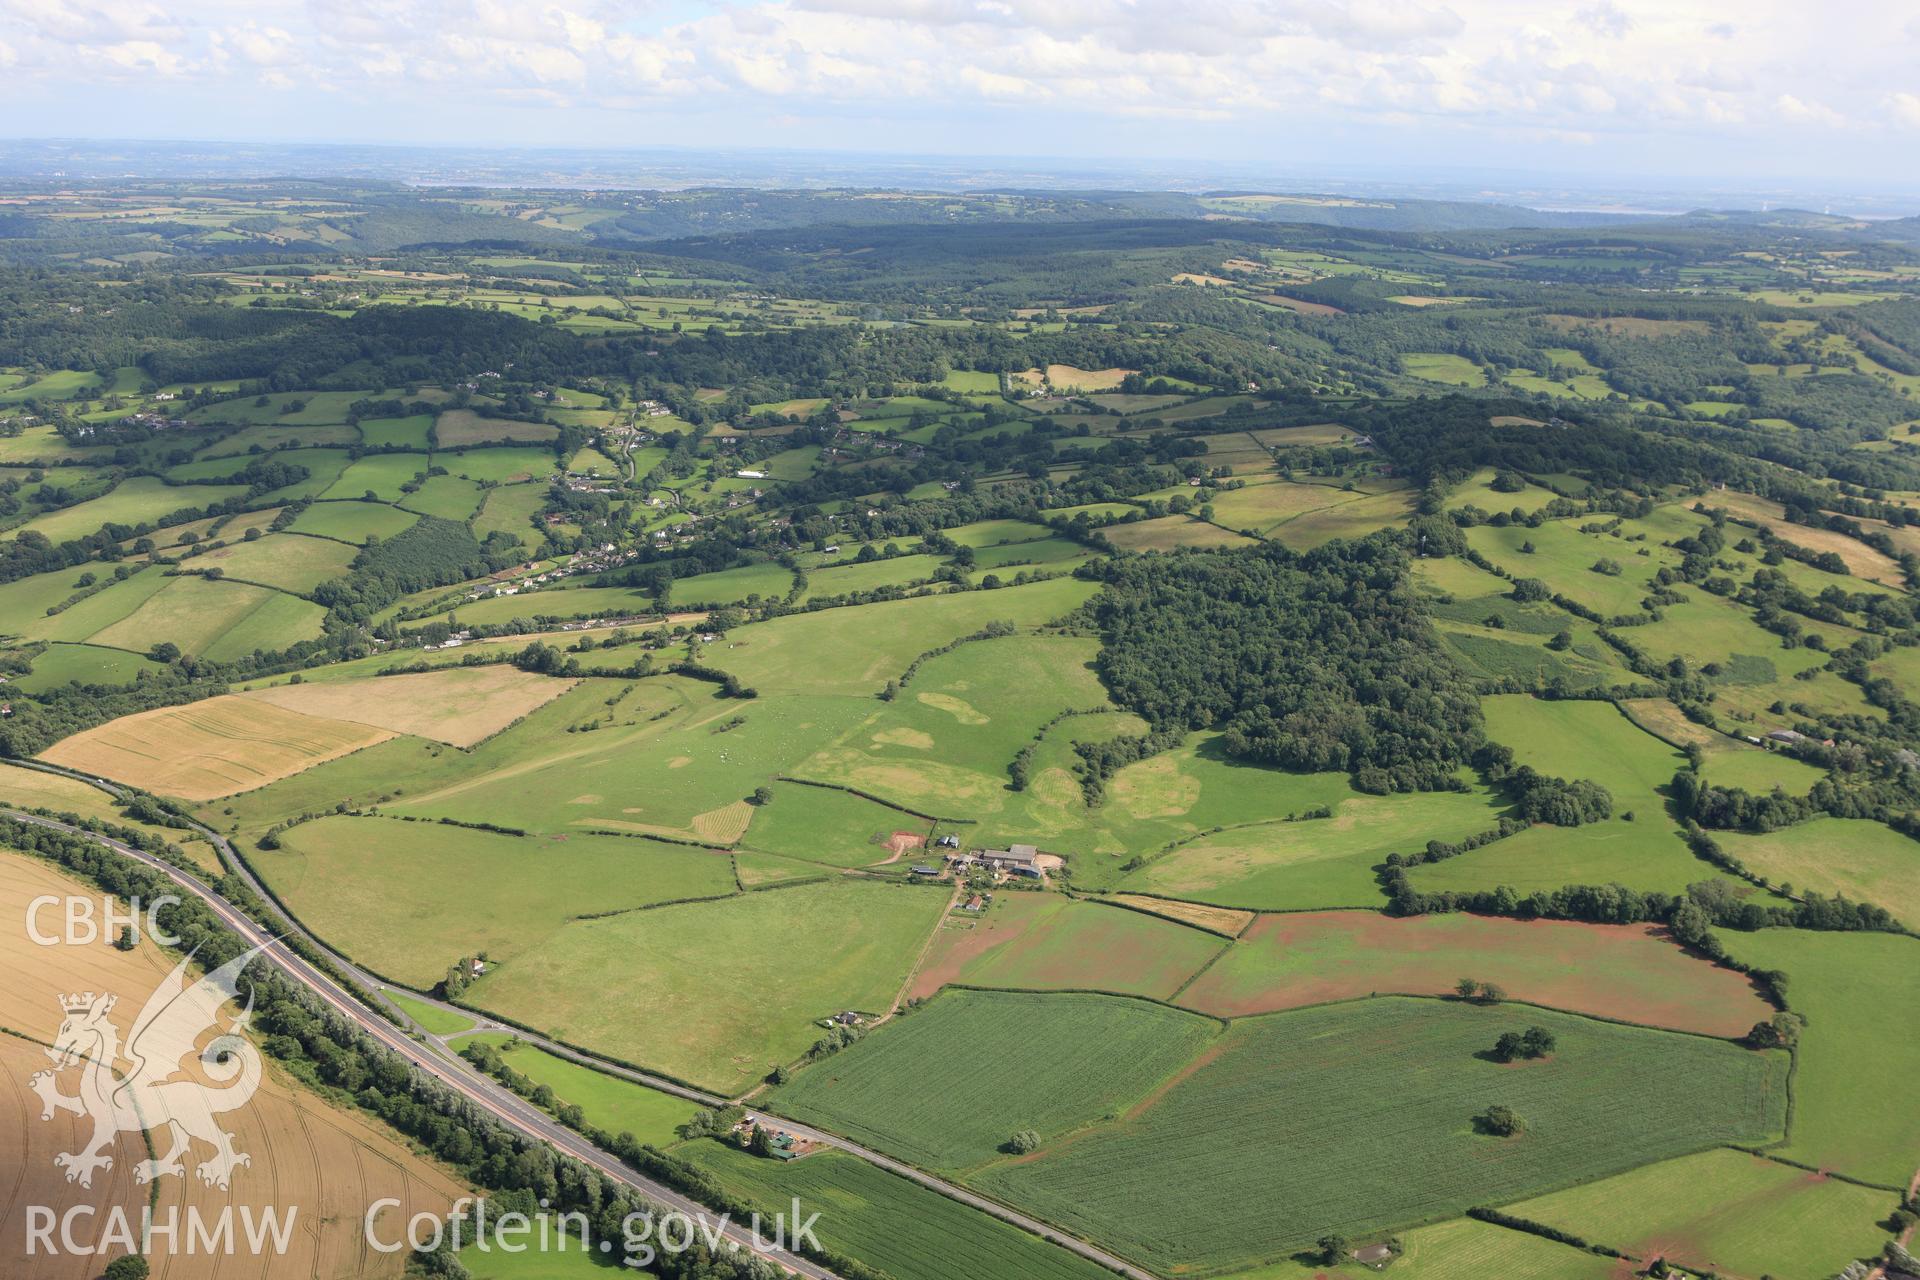 RCAHMW colour oblique aerial photograph of the site of a battle at Craig-y-Dorth, near Monmouth, from the north. Taken on 23 July 2009 by Toby Driver